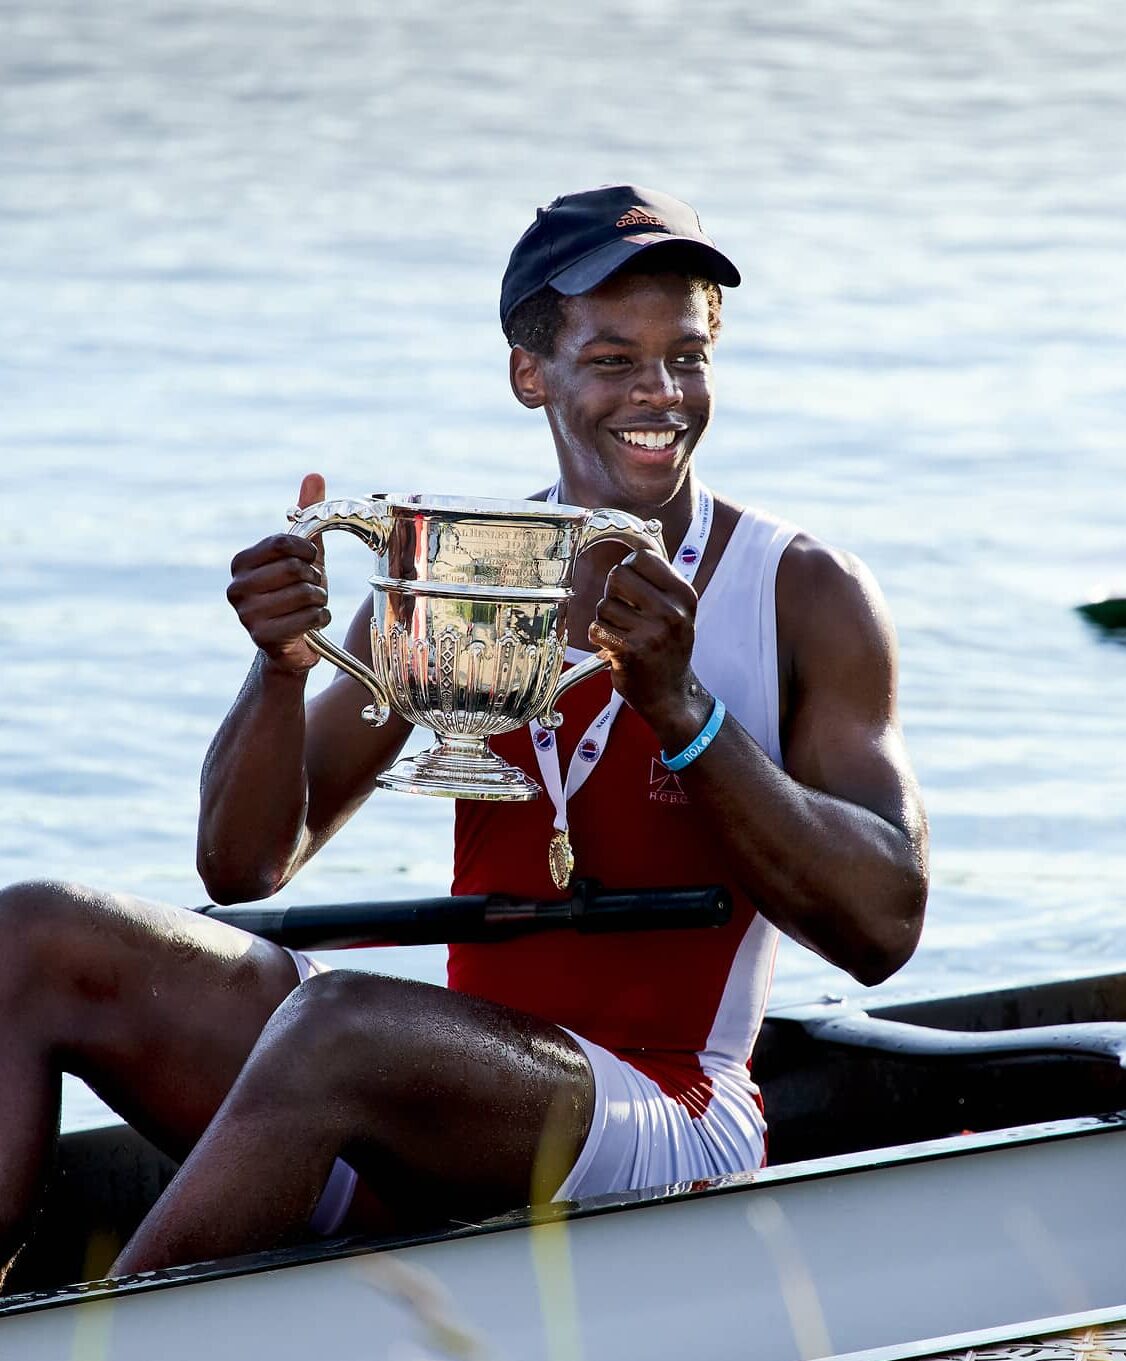 Male rower holding a trophy competing for Radley College